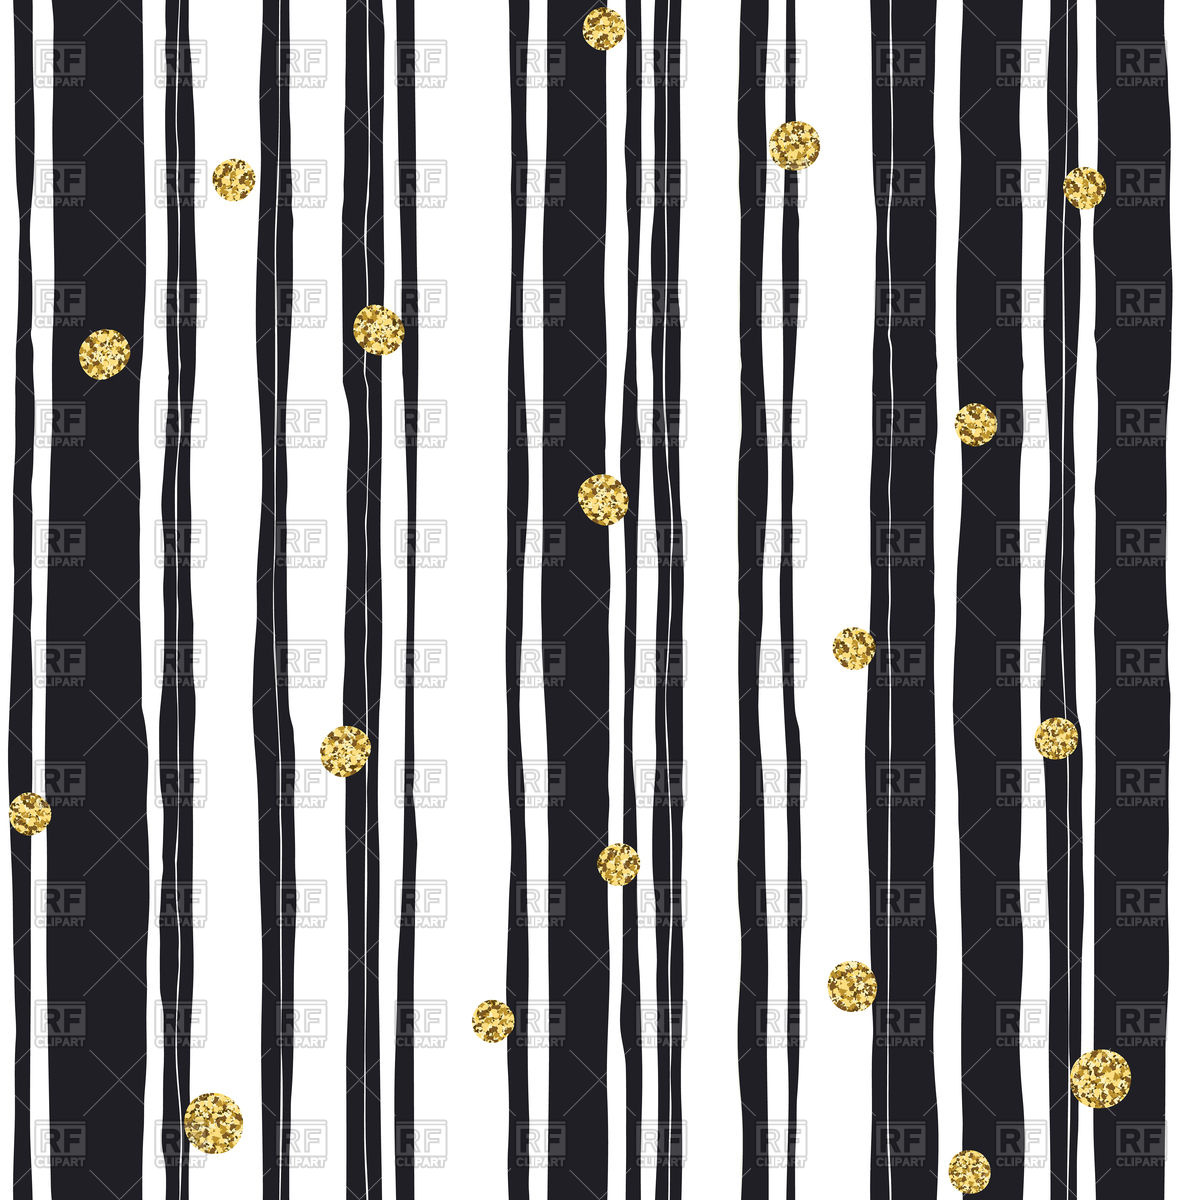 Black white and grey striped clipart.